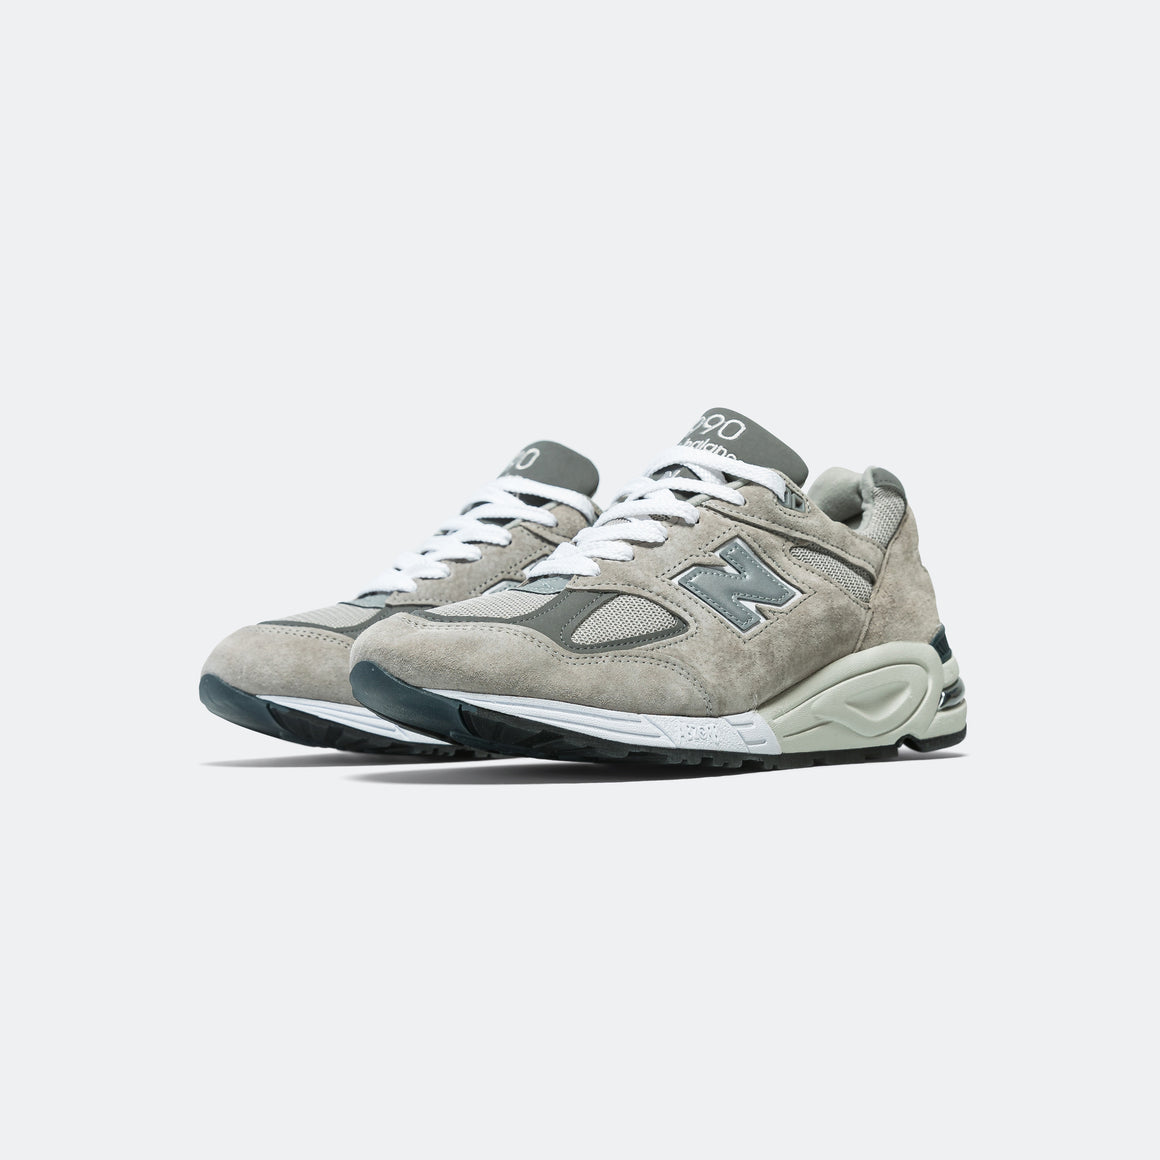 New Balance - M990GY2 - UP THERE